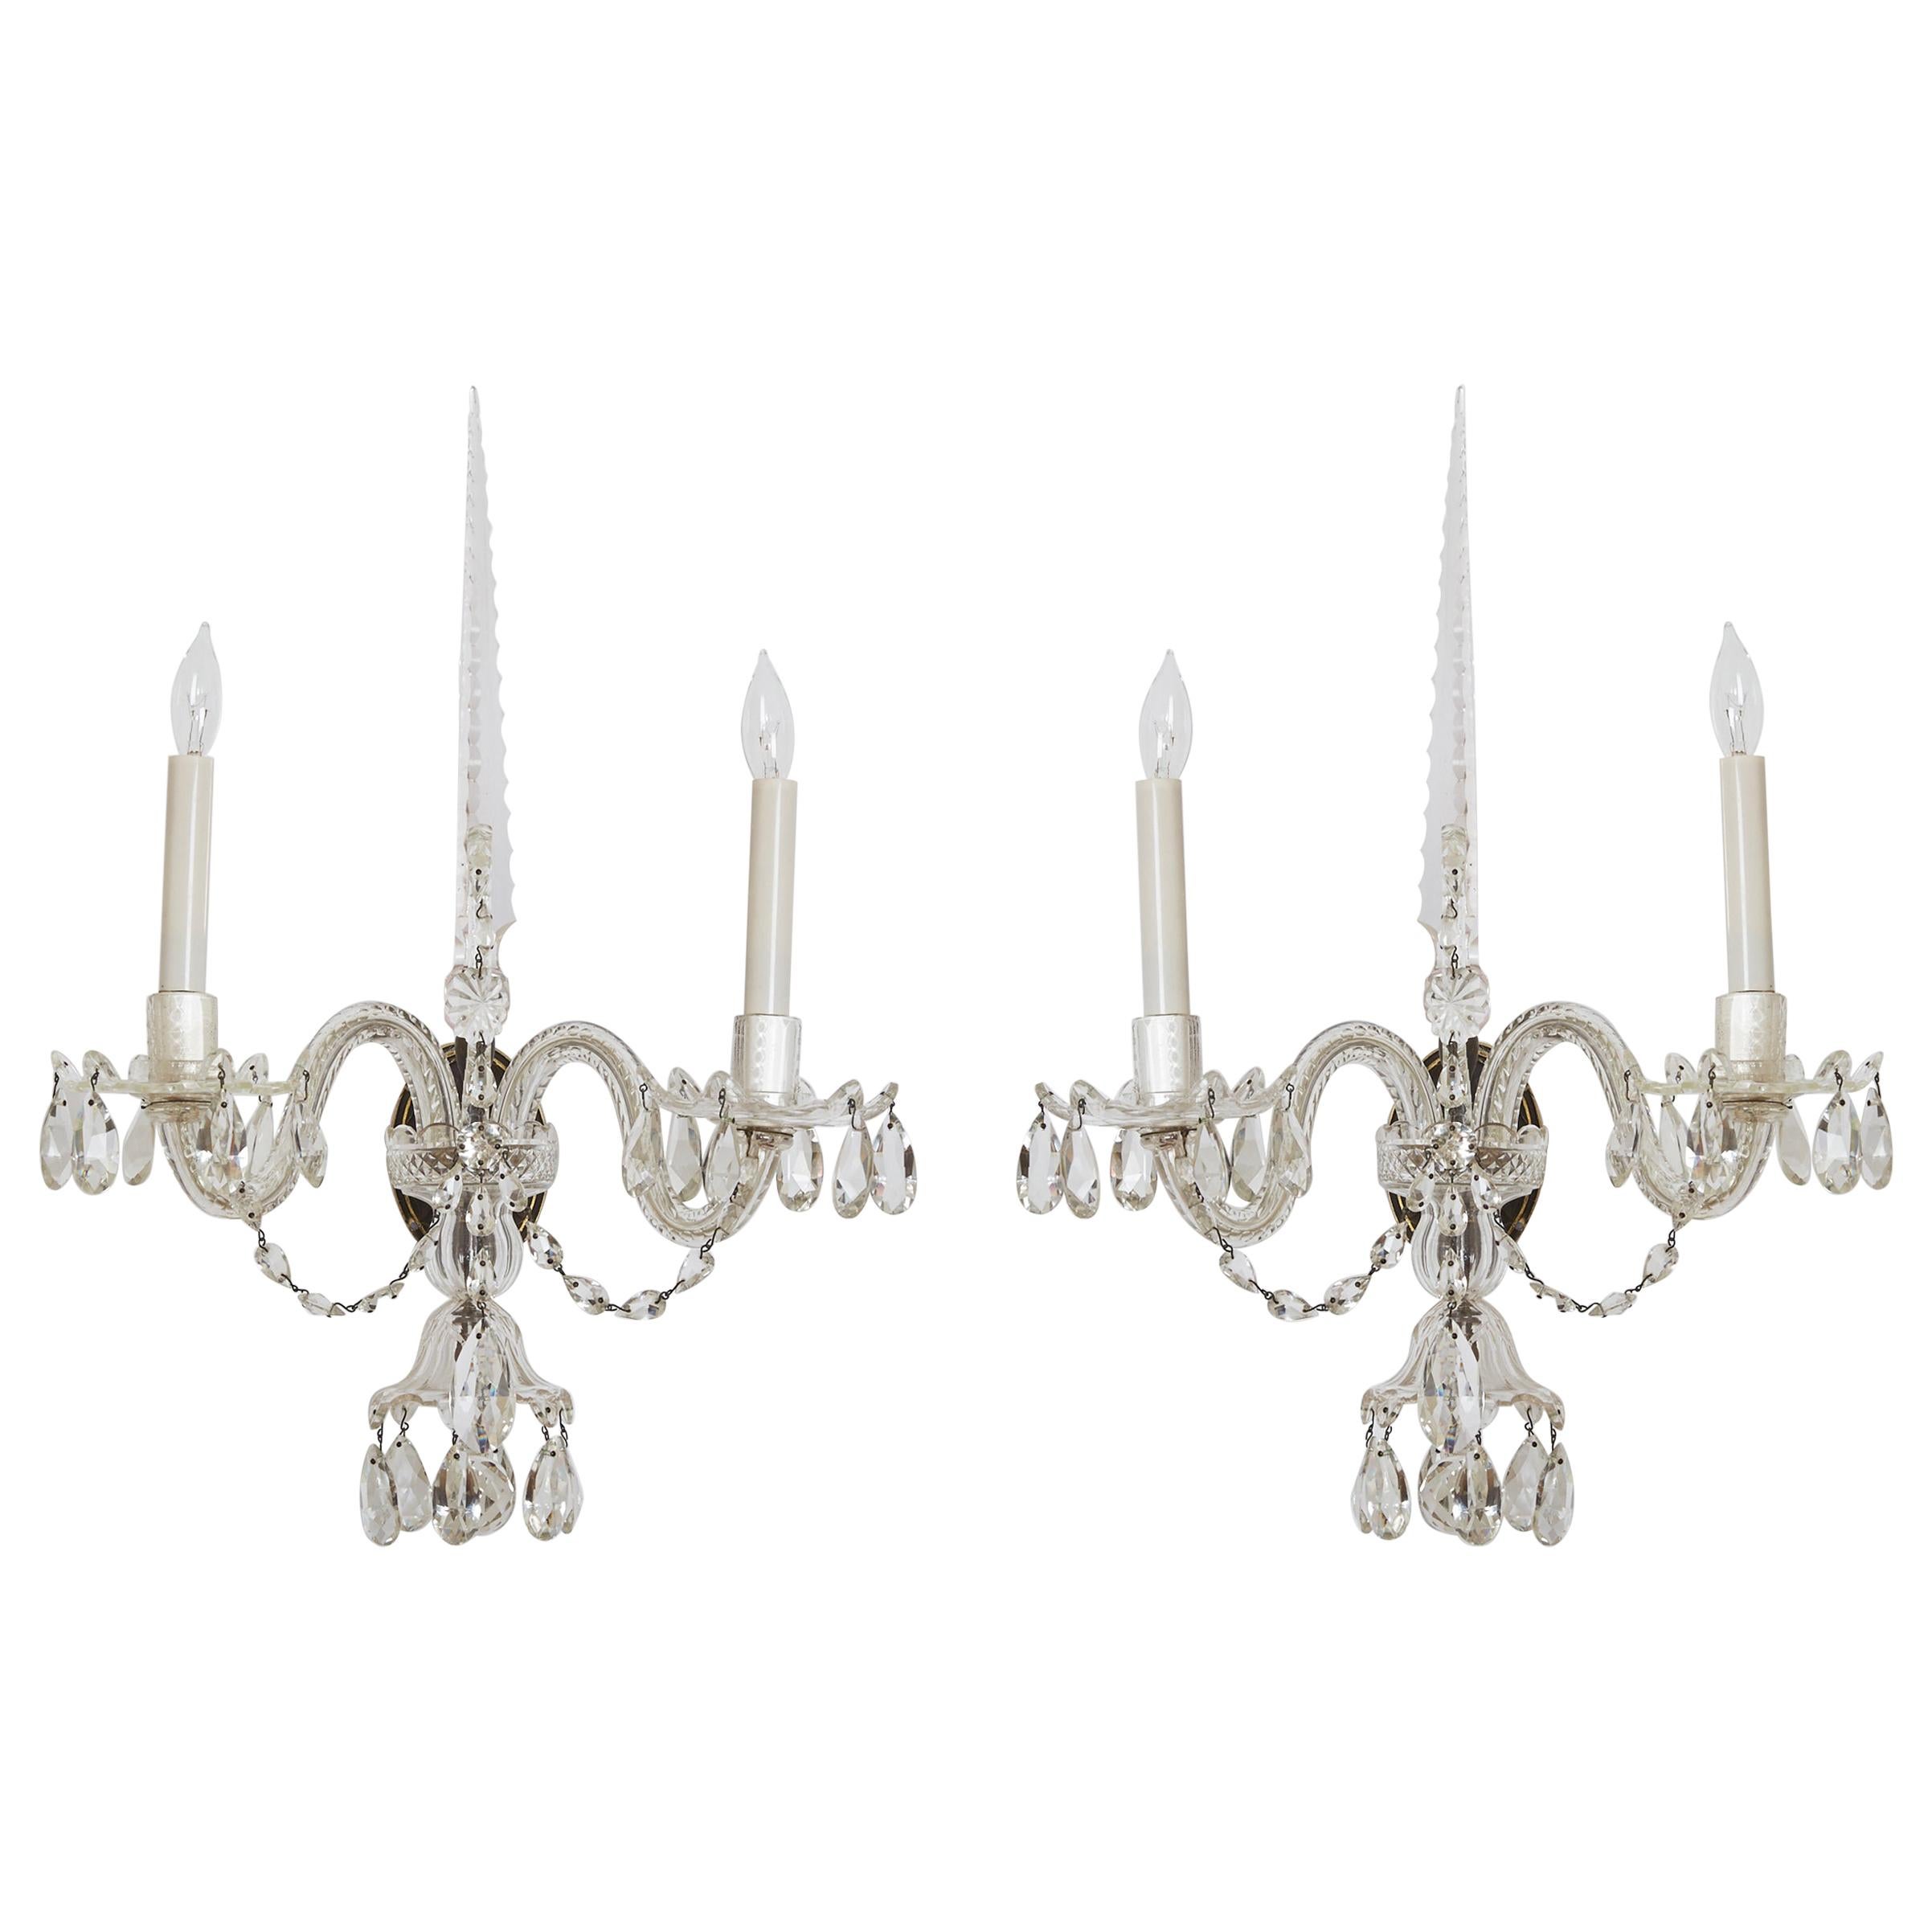 Pair of George III Style Crystal Sconces, Two Armed Sconces, Circa 1890